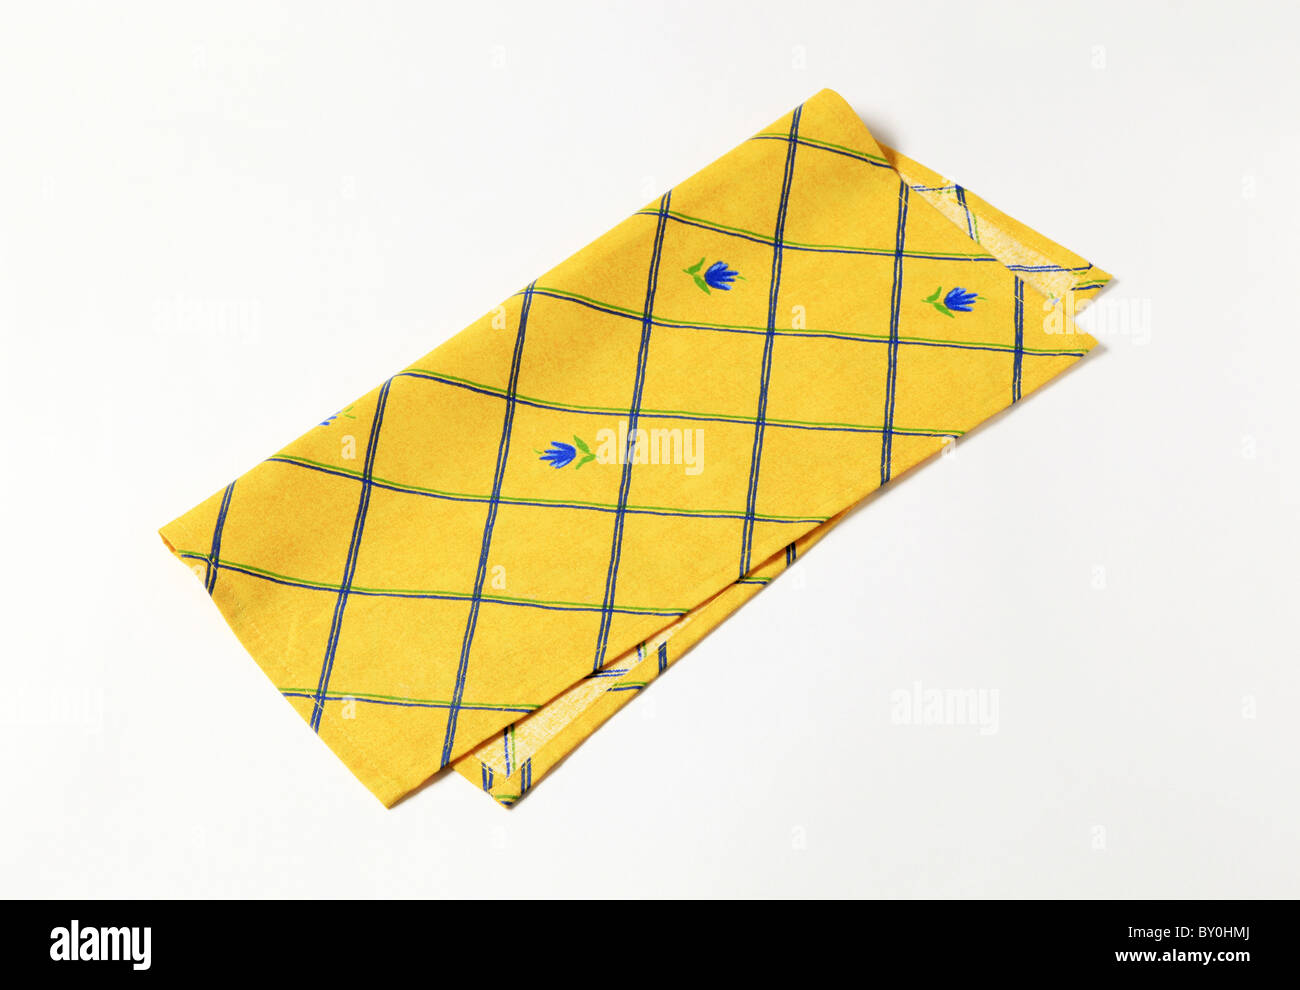 Small yellow napkin with flower pattern Stock Photo